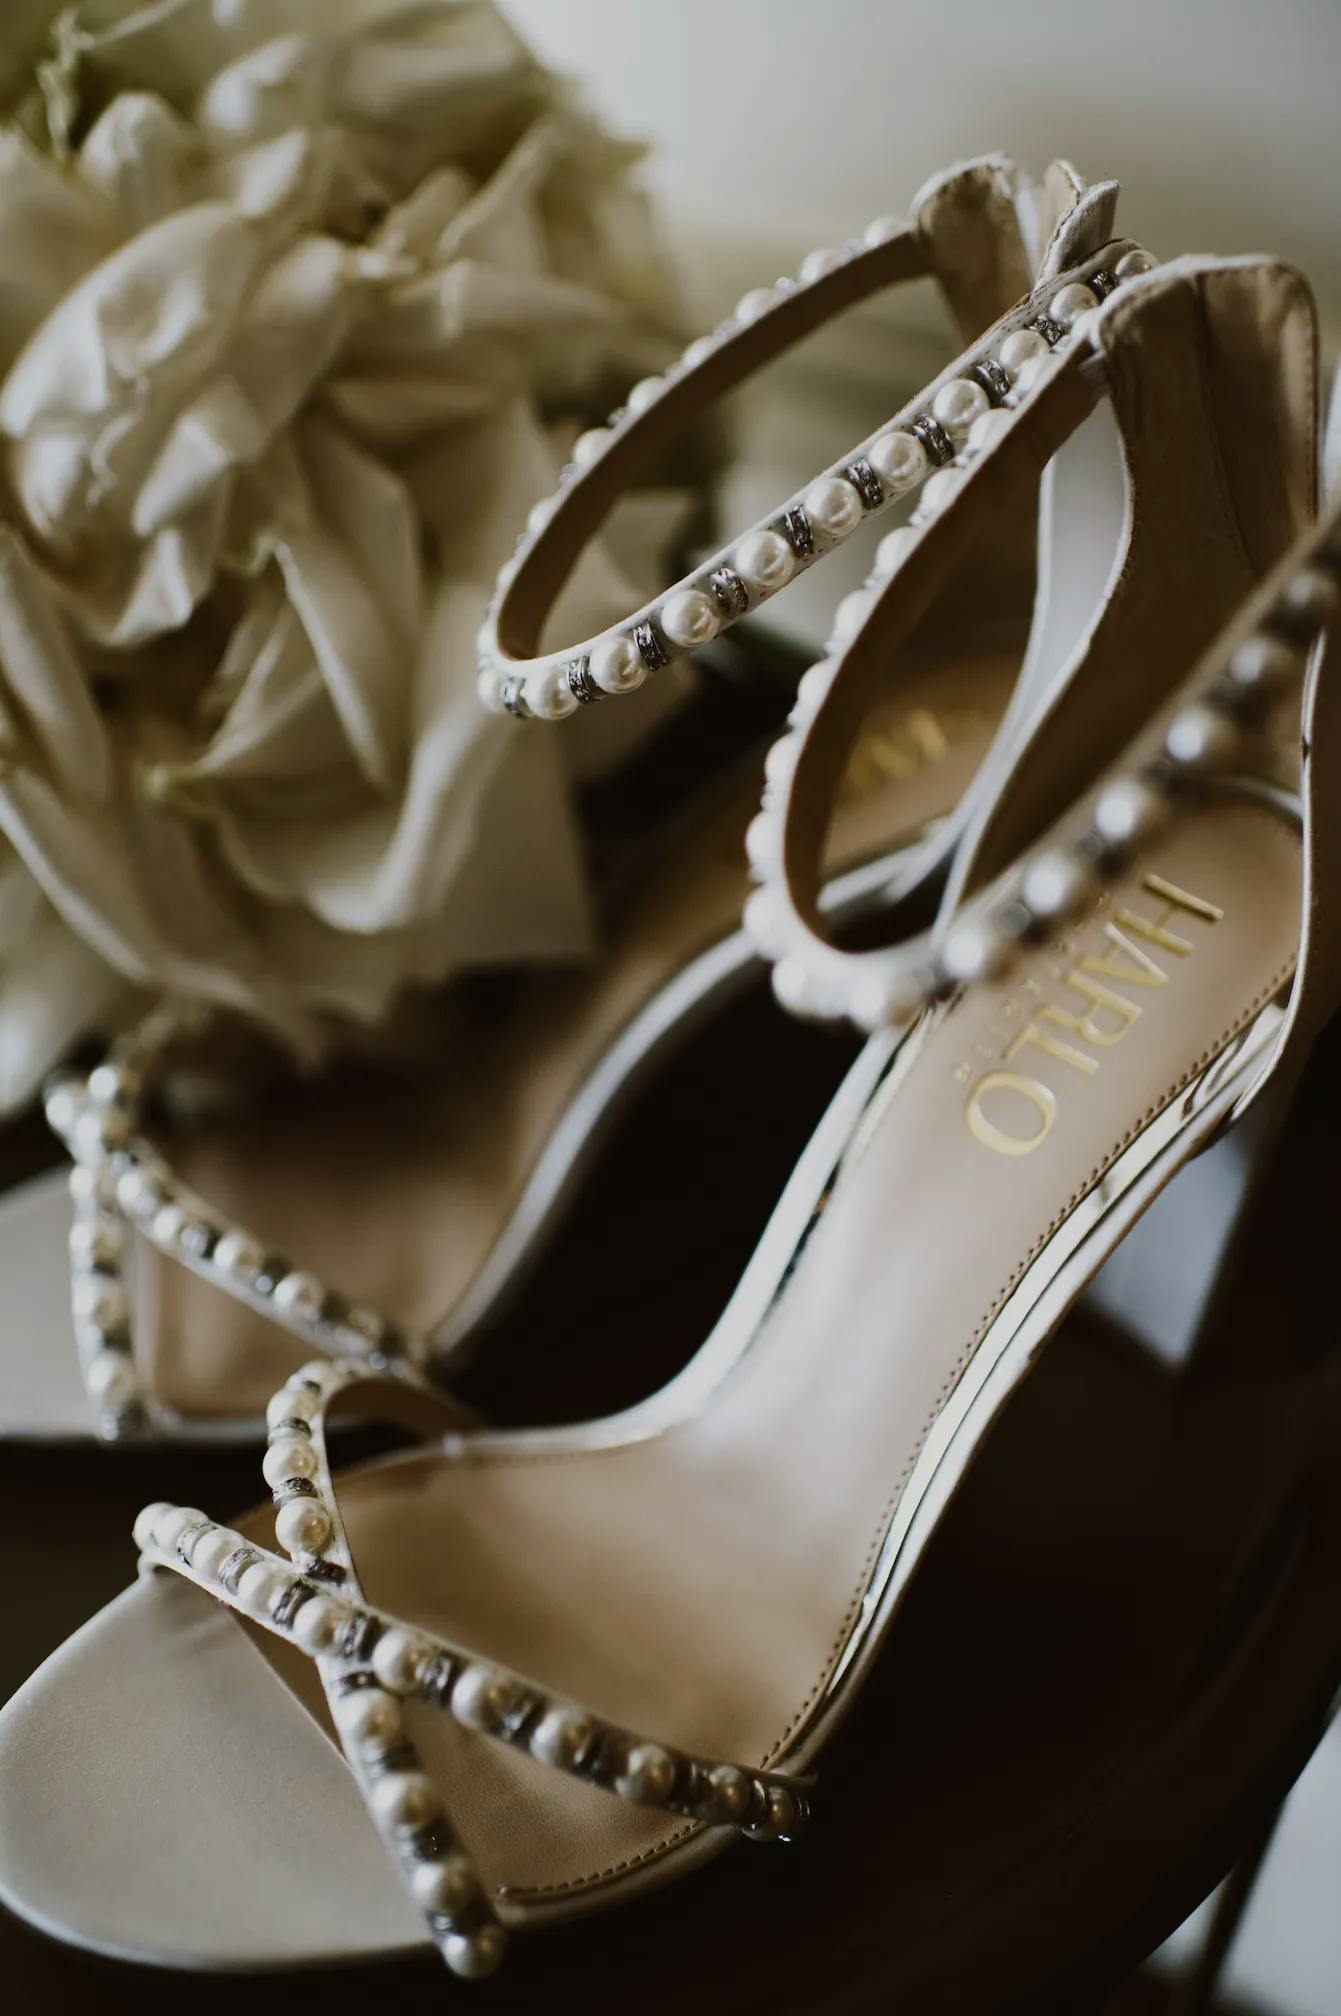 Close-up of a pair of elegant open-toe high-heeled shoes decorated with pearls, placed on a dark surface. A bouquet of white flowers is softly blurred in the background, providing a delicate and sophisticated ambiance.